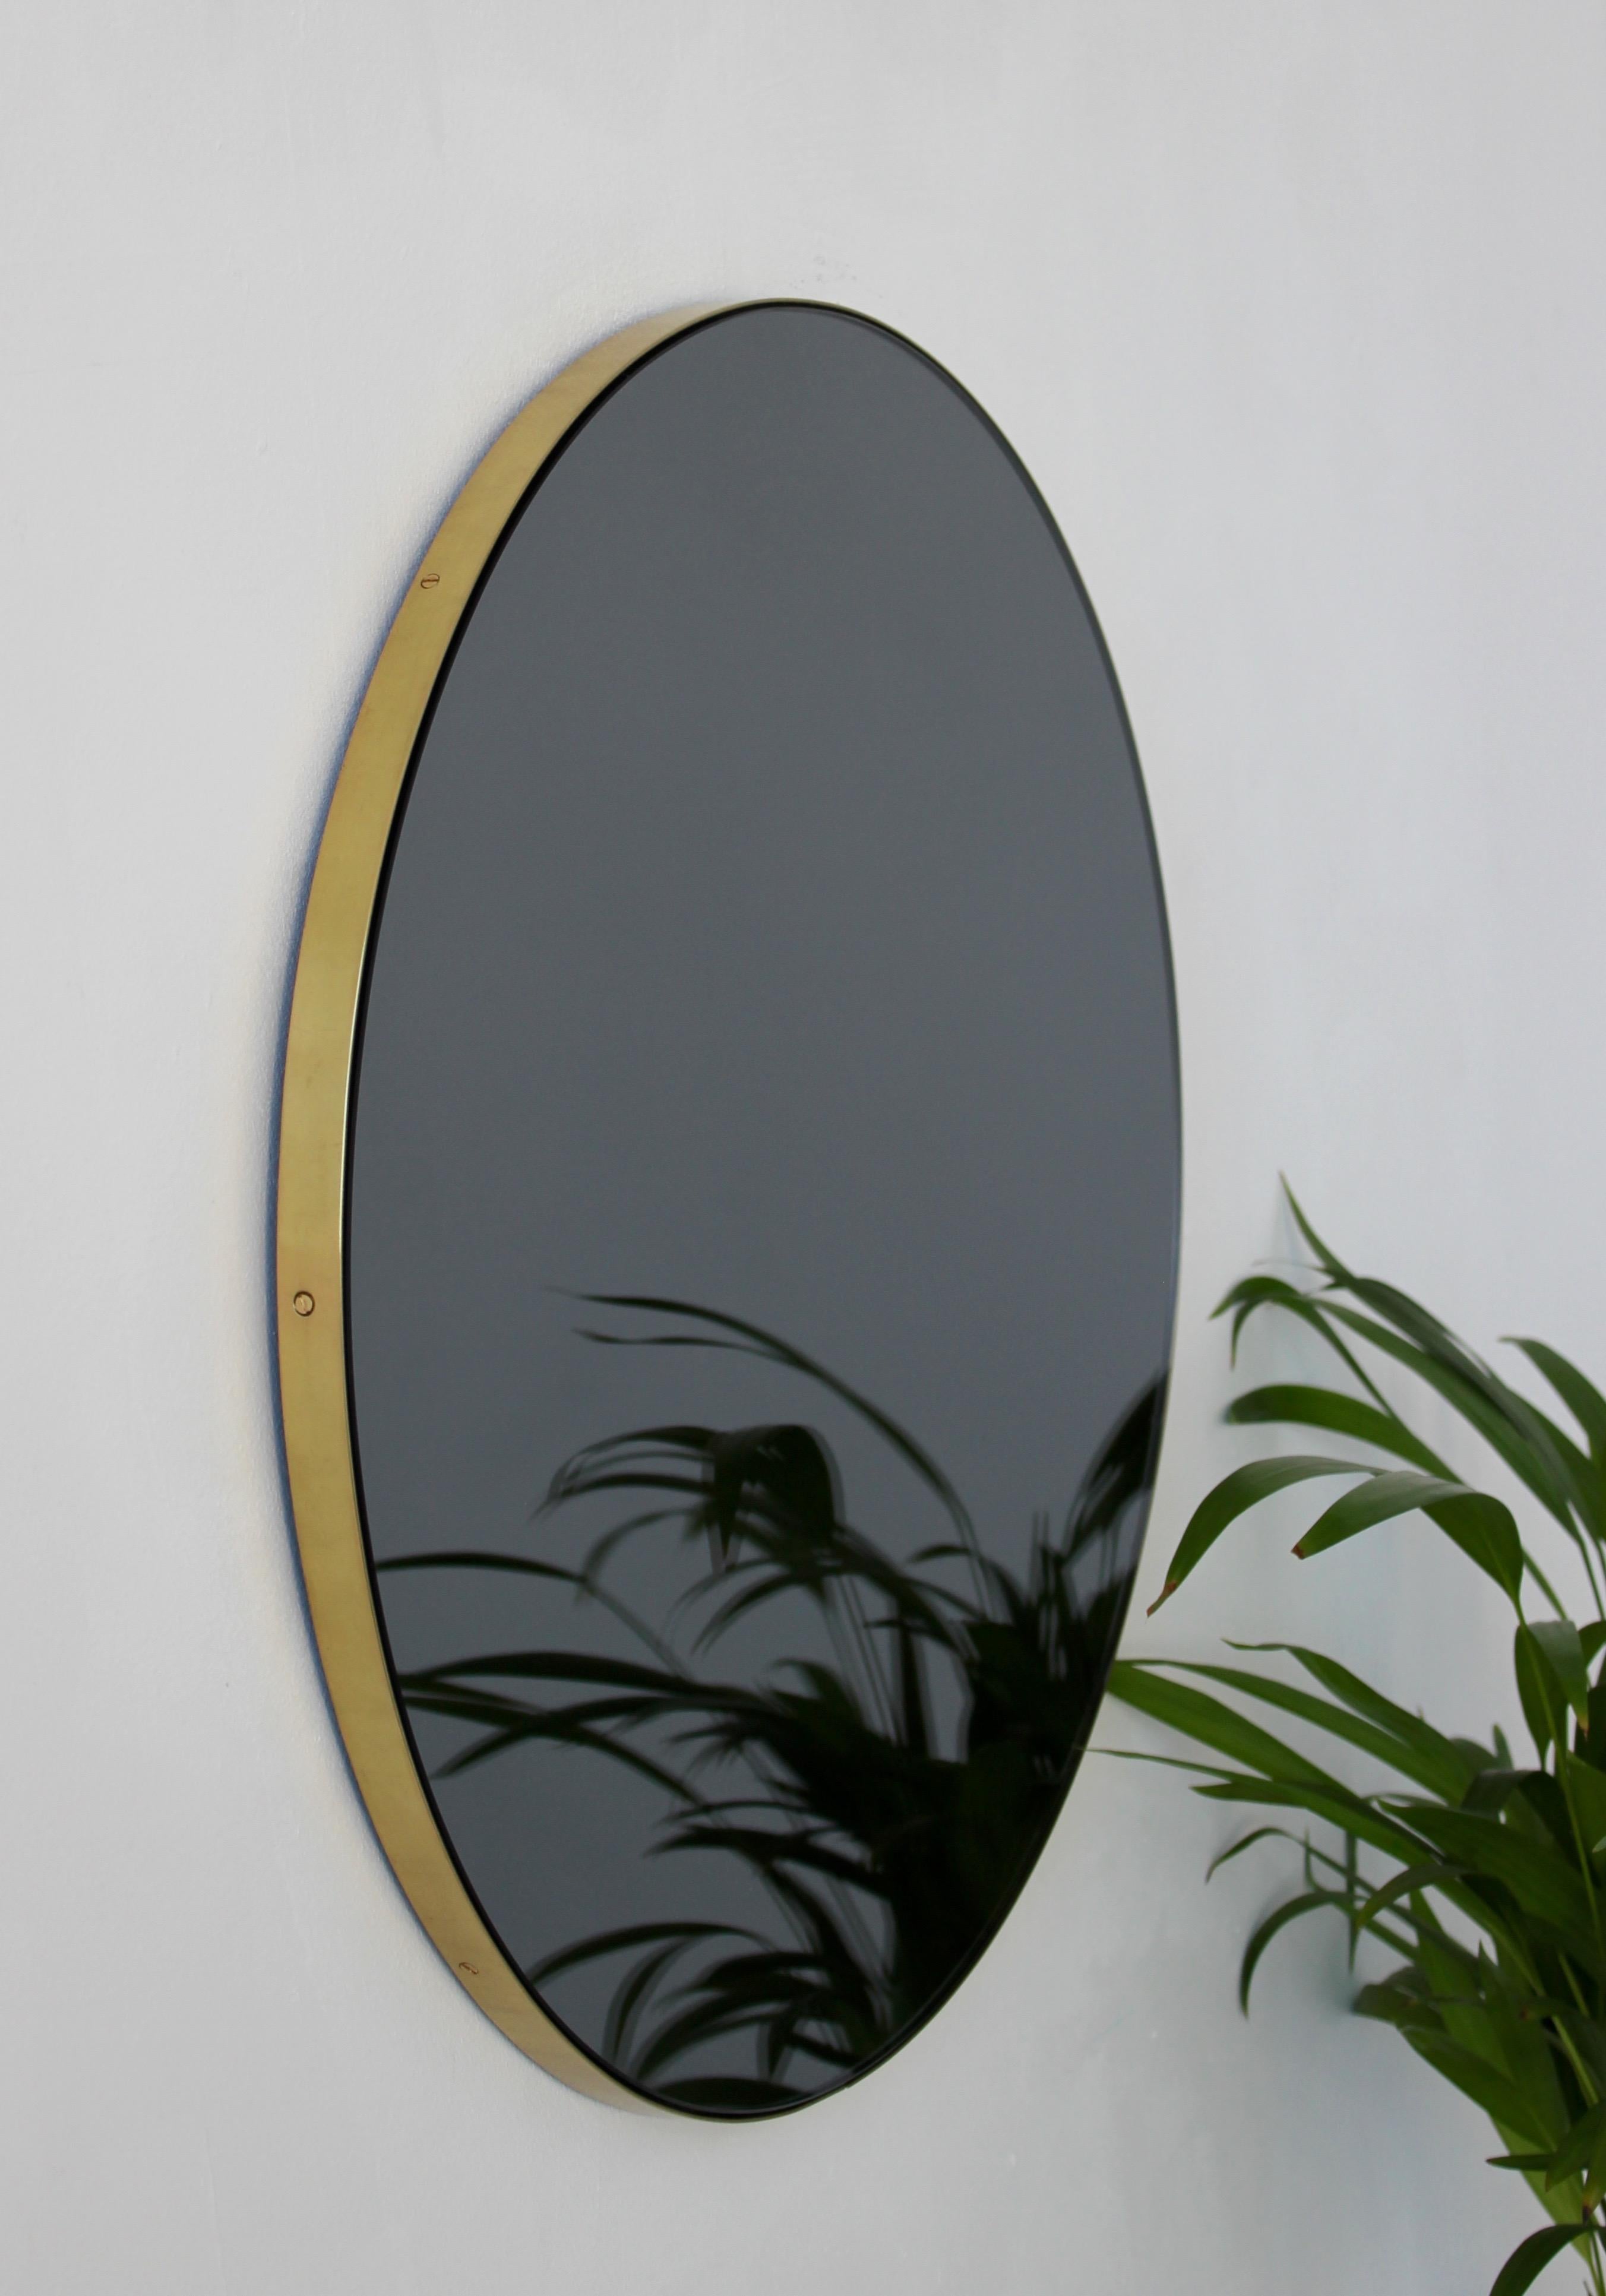 Minimalist black tinted round mirror with an elegant brushed brass frame. The detailing and finish, including visible brass screws, emphasise the crafty and quality feel of the mirror, a true signature of our brand. Designed and handcrafted in